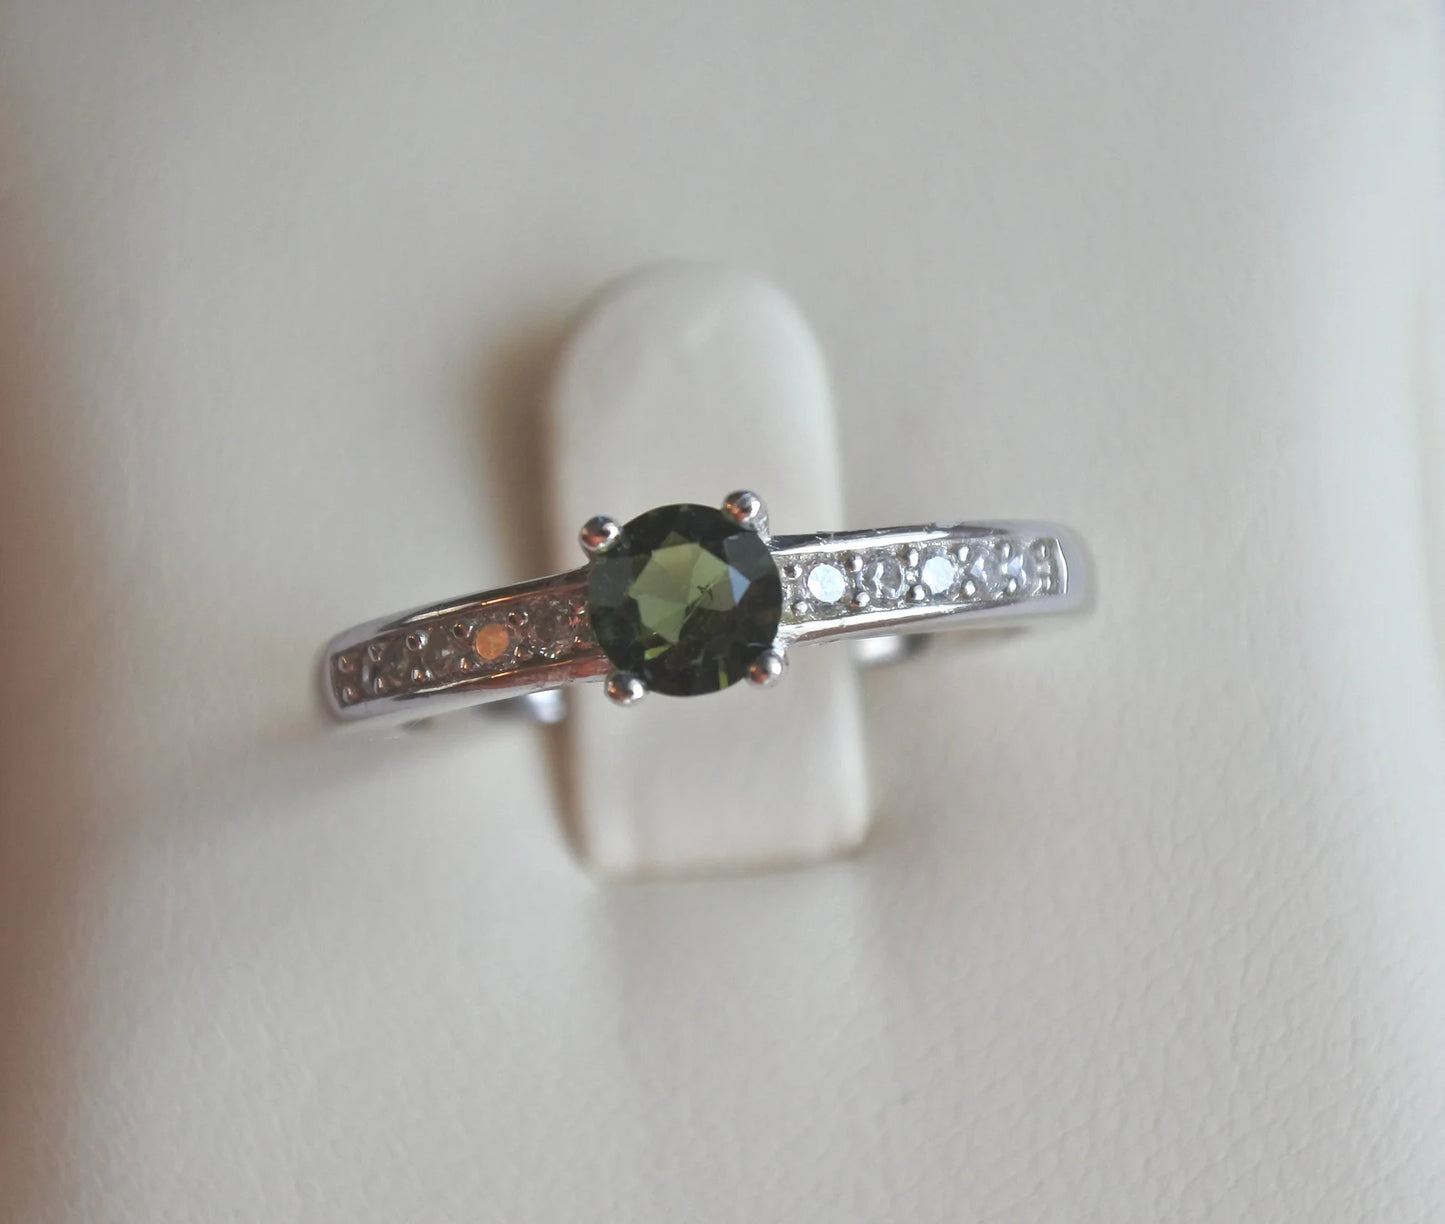 CZECH MOLDAVITE ring 5mm stone, Sterling Silver Moldavite jewelry with certification, real moldavite ring authentic moldavite jewellery